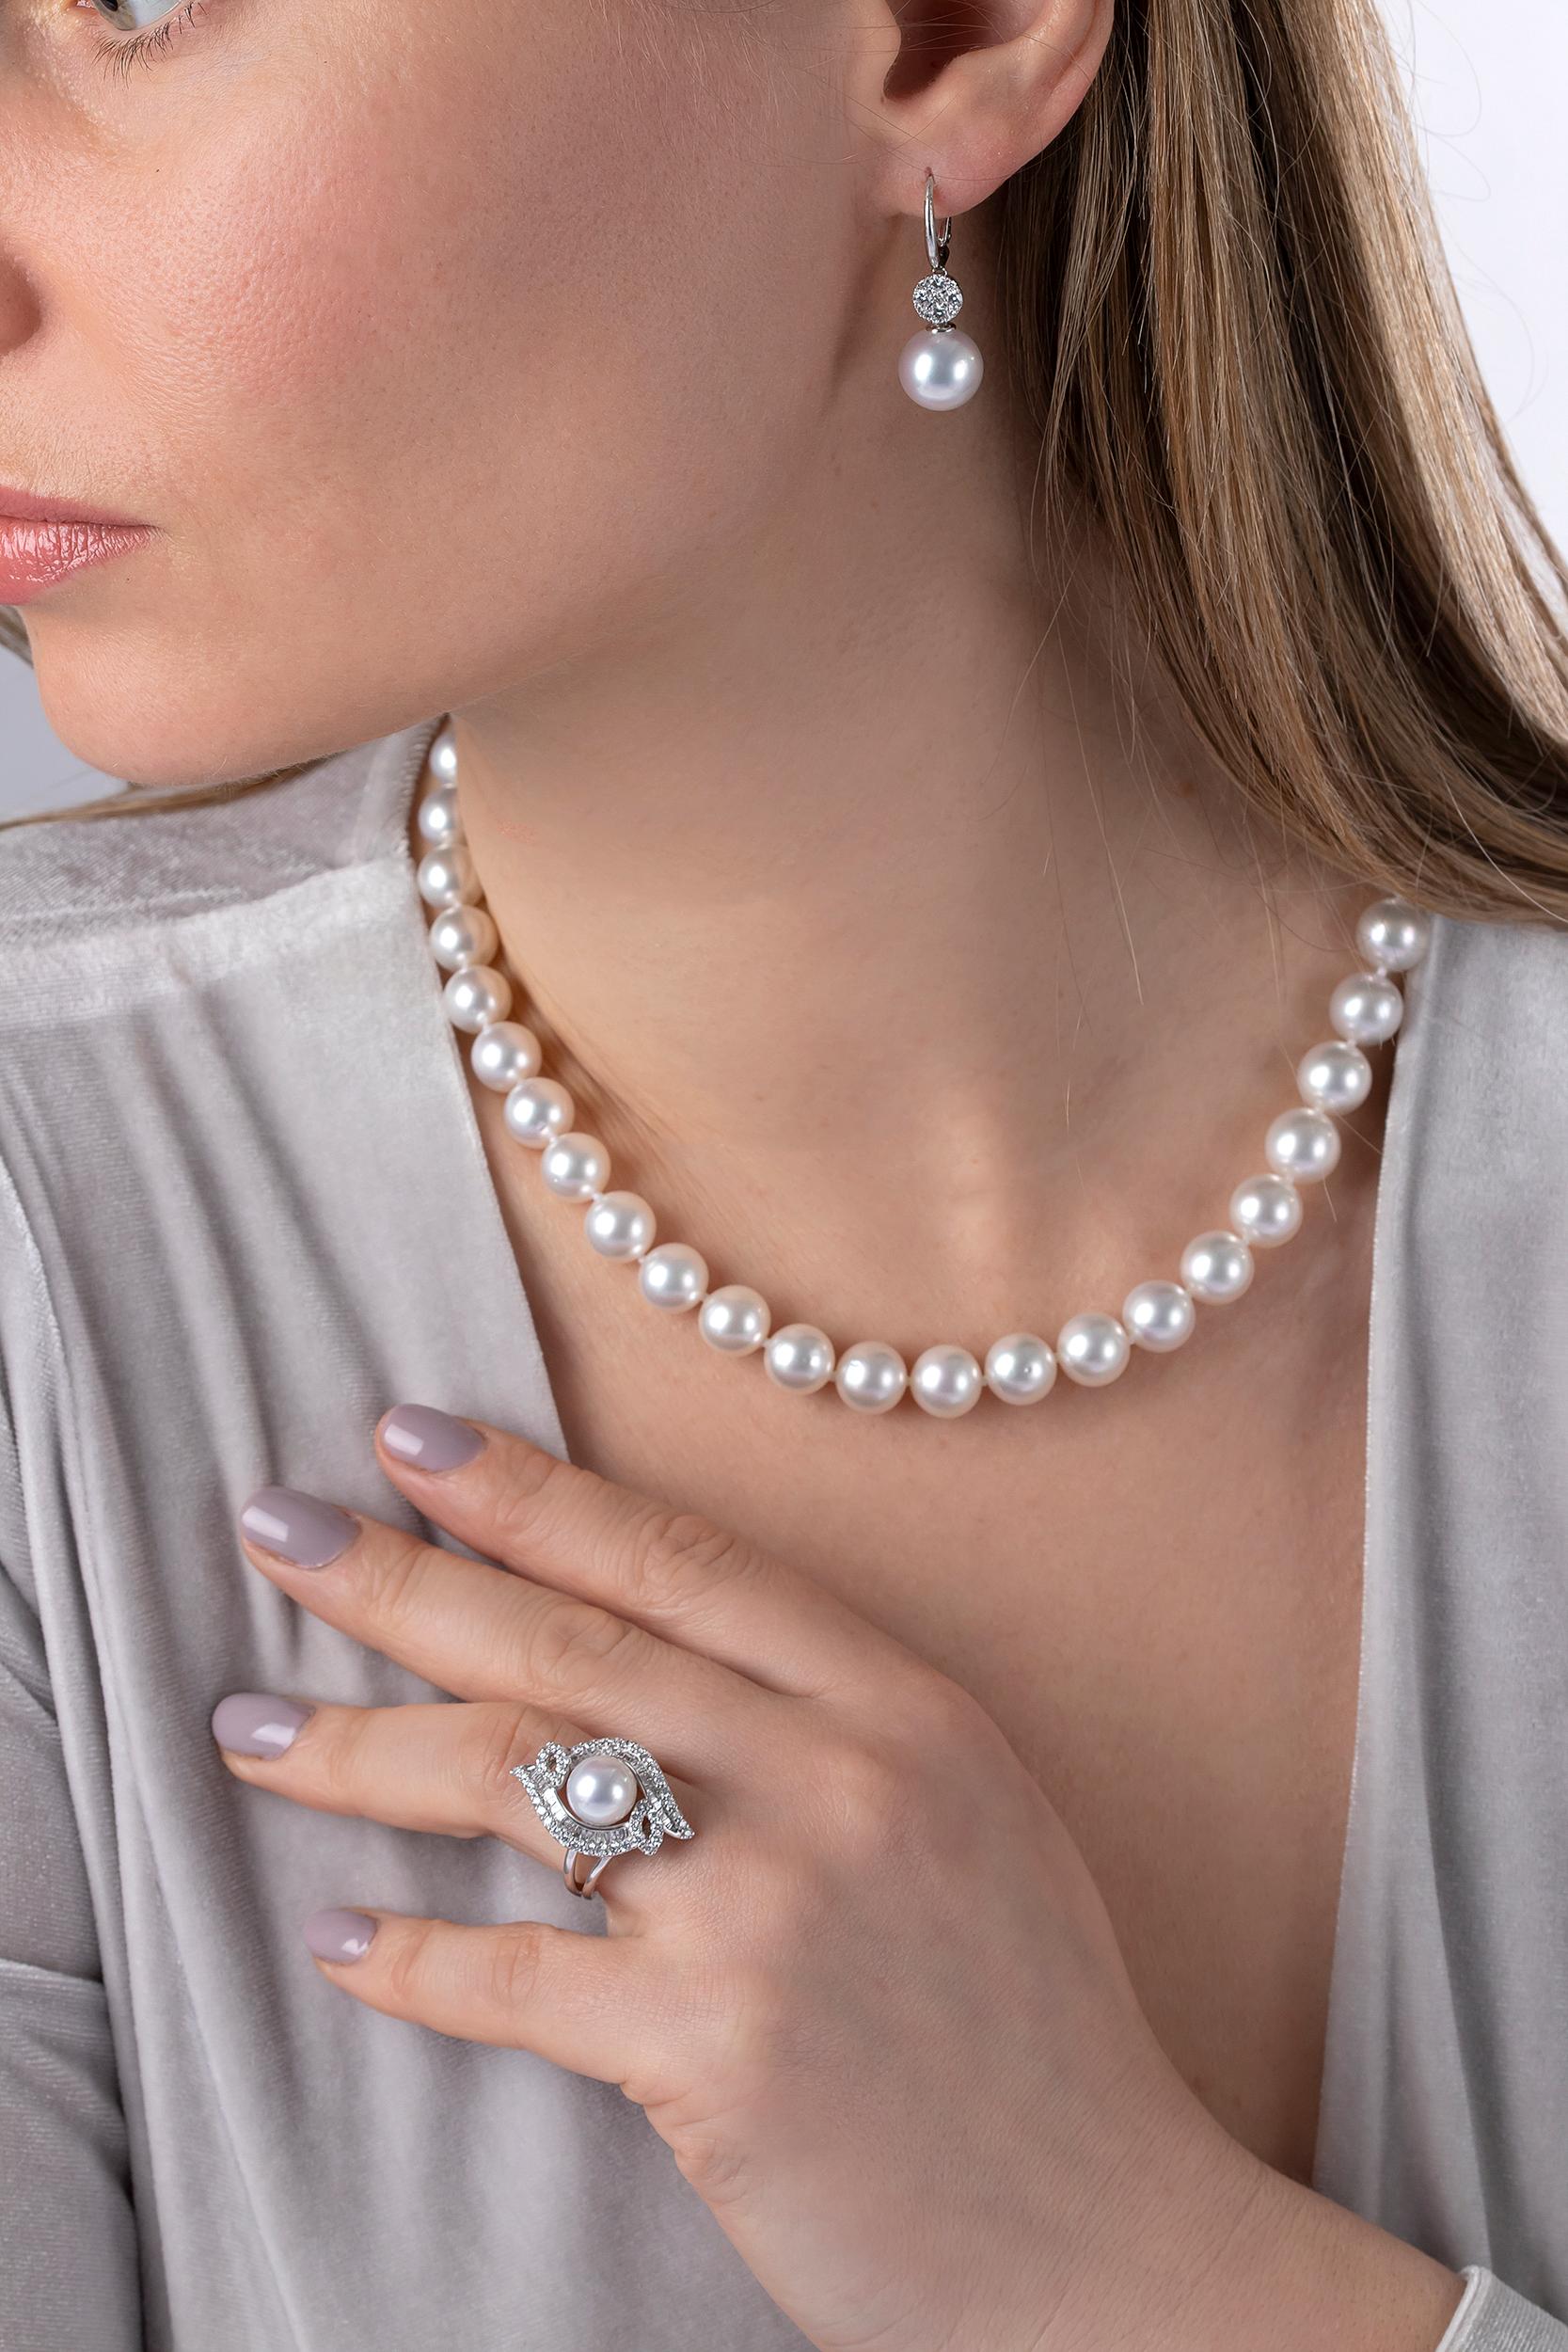 This timeless necklace by Yoko London features premium 9-10.4mm Australian South Sea pearls, finished with an elegant diamond-set 18K white gold clasp. Crafted in our London atelier by the world’s leading pearl specialists, this classic necklace an